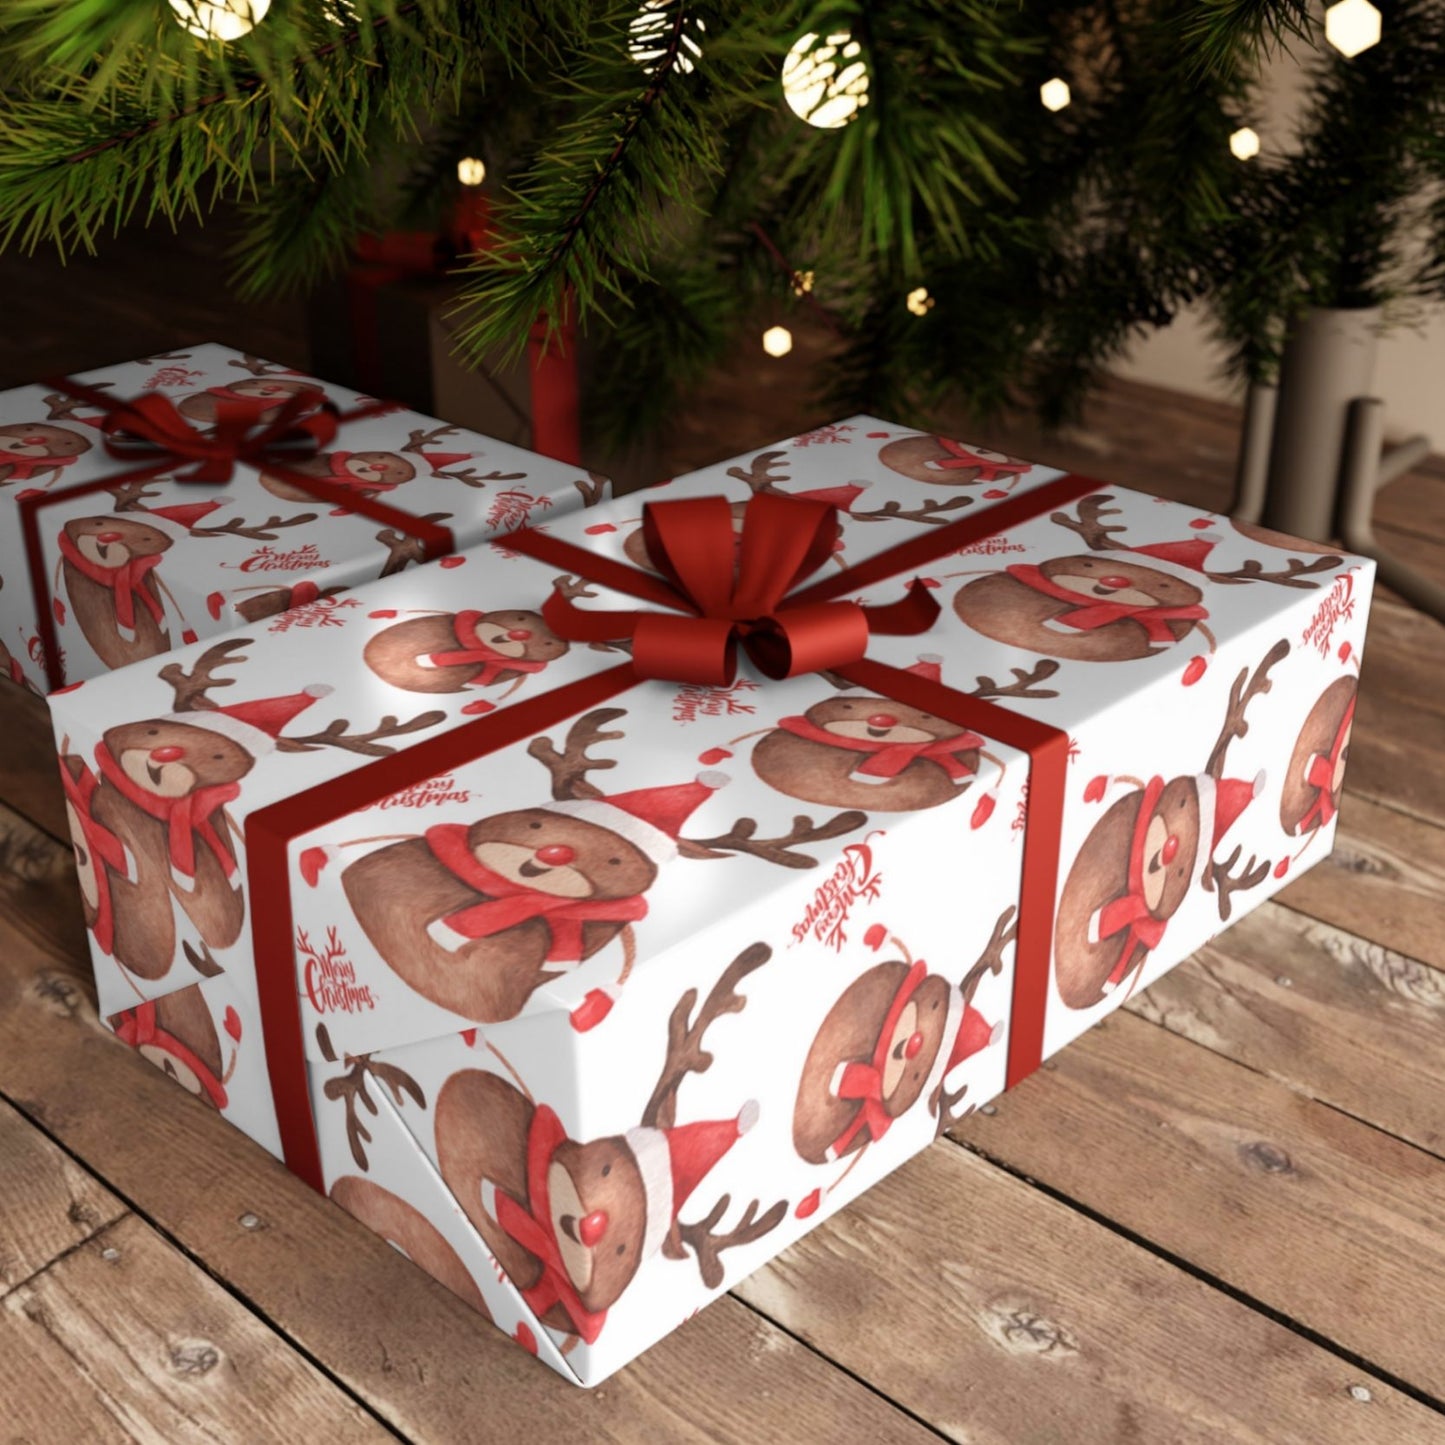 Rudolph's Merry Christmas Wrapping Paper